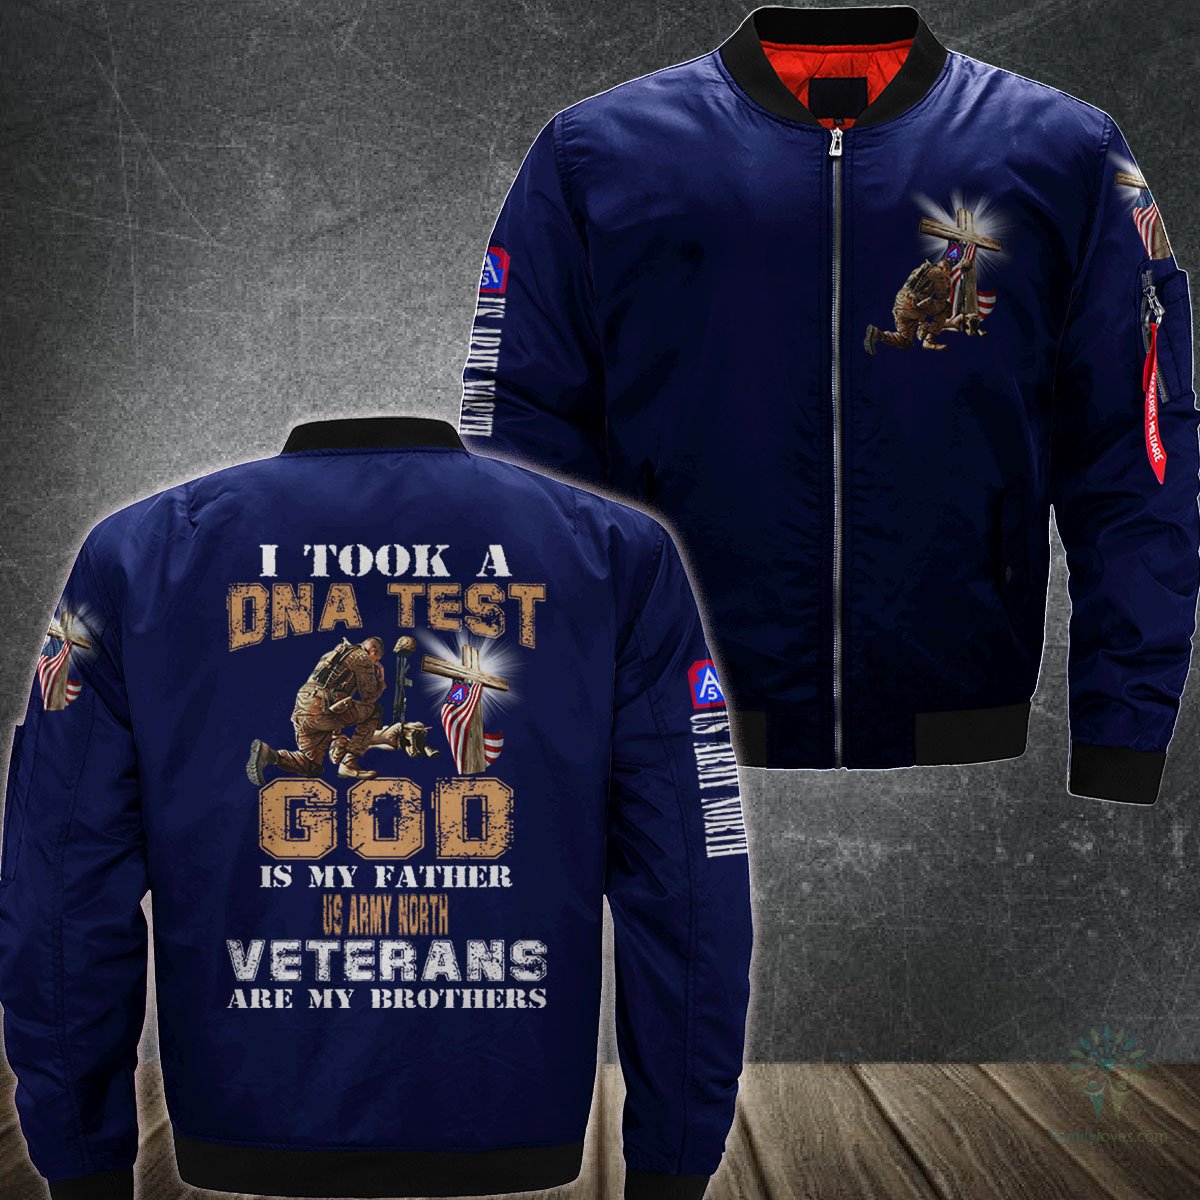 Us Army North Hoodie I Took A Dna Test And God Is My Father Hoodie Tshirt Jacket Sweatshirt